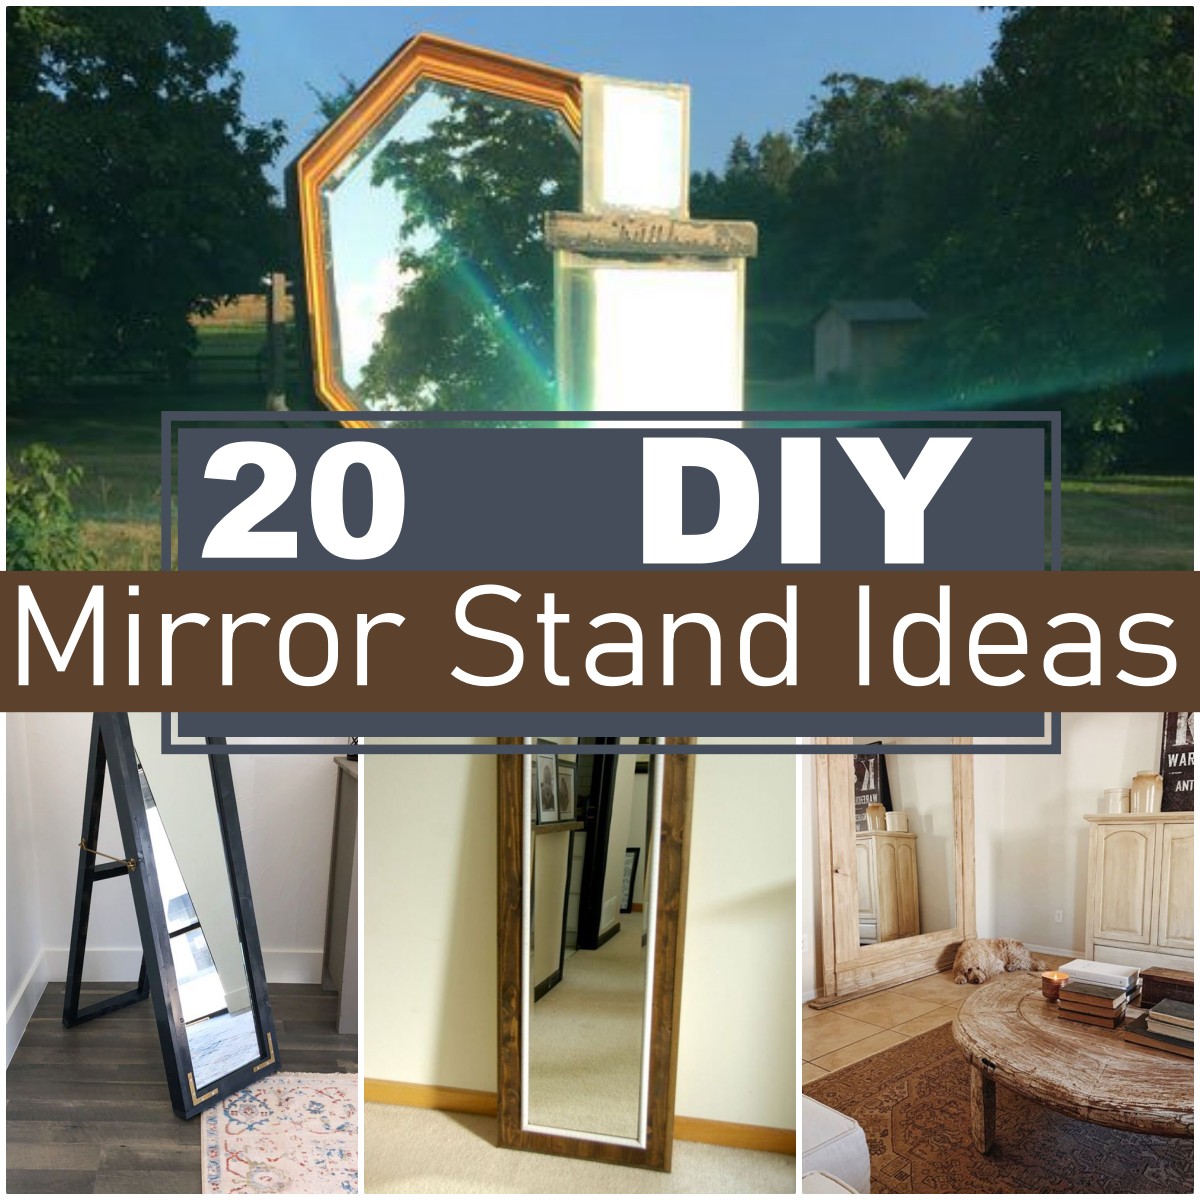 DIY Make a Wide Wood Frame for an Inexpensive Mirror - My Bright Ideas